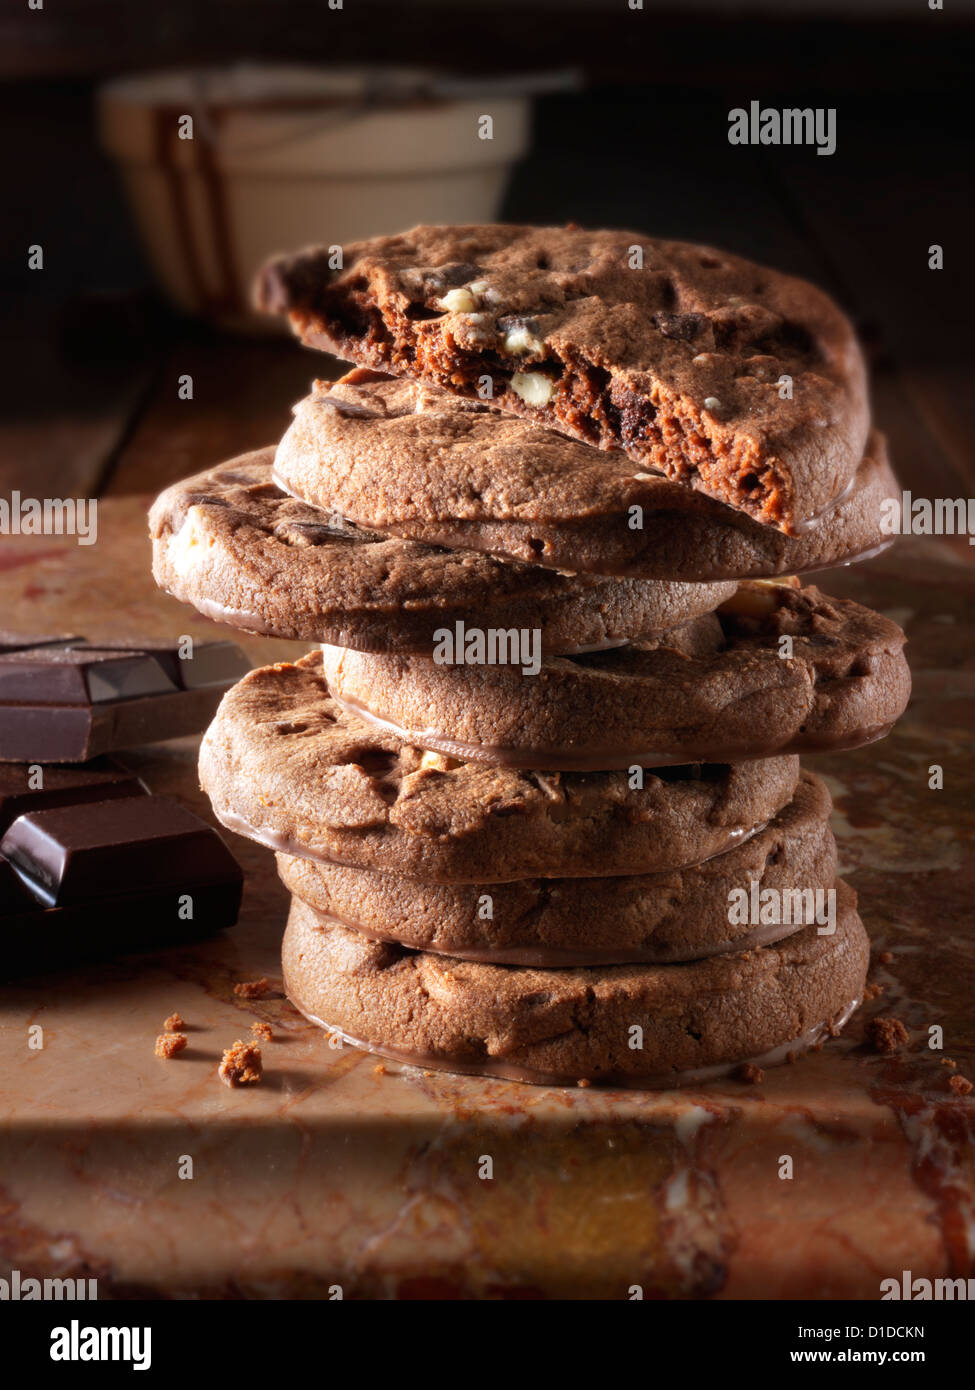 Chocolate biscuits Stock Photo